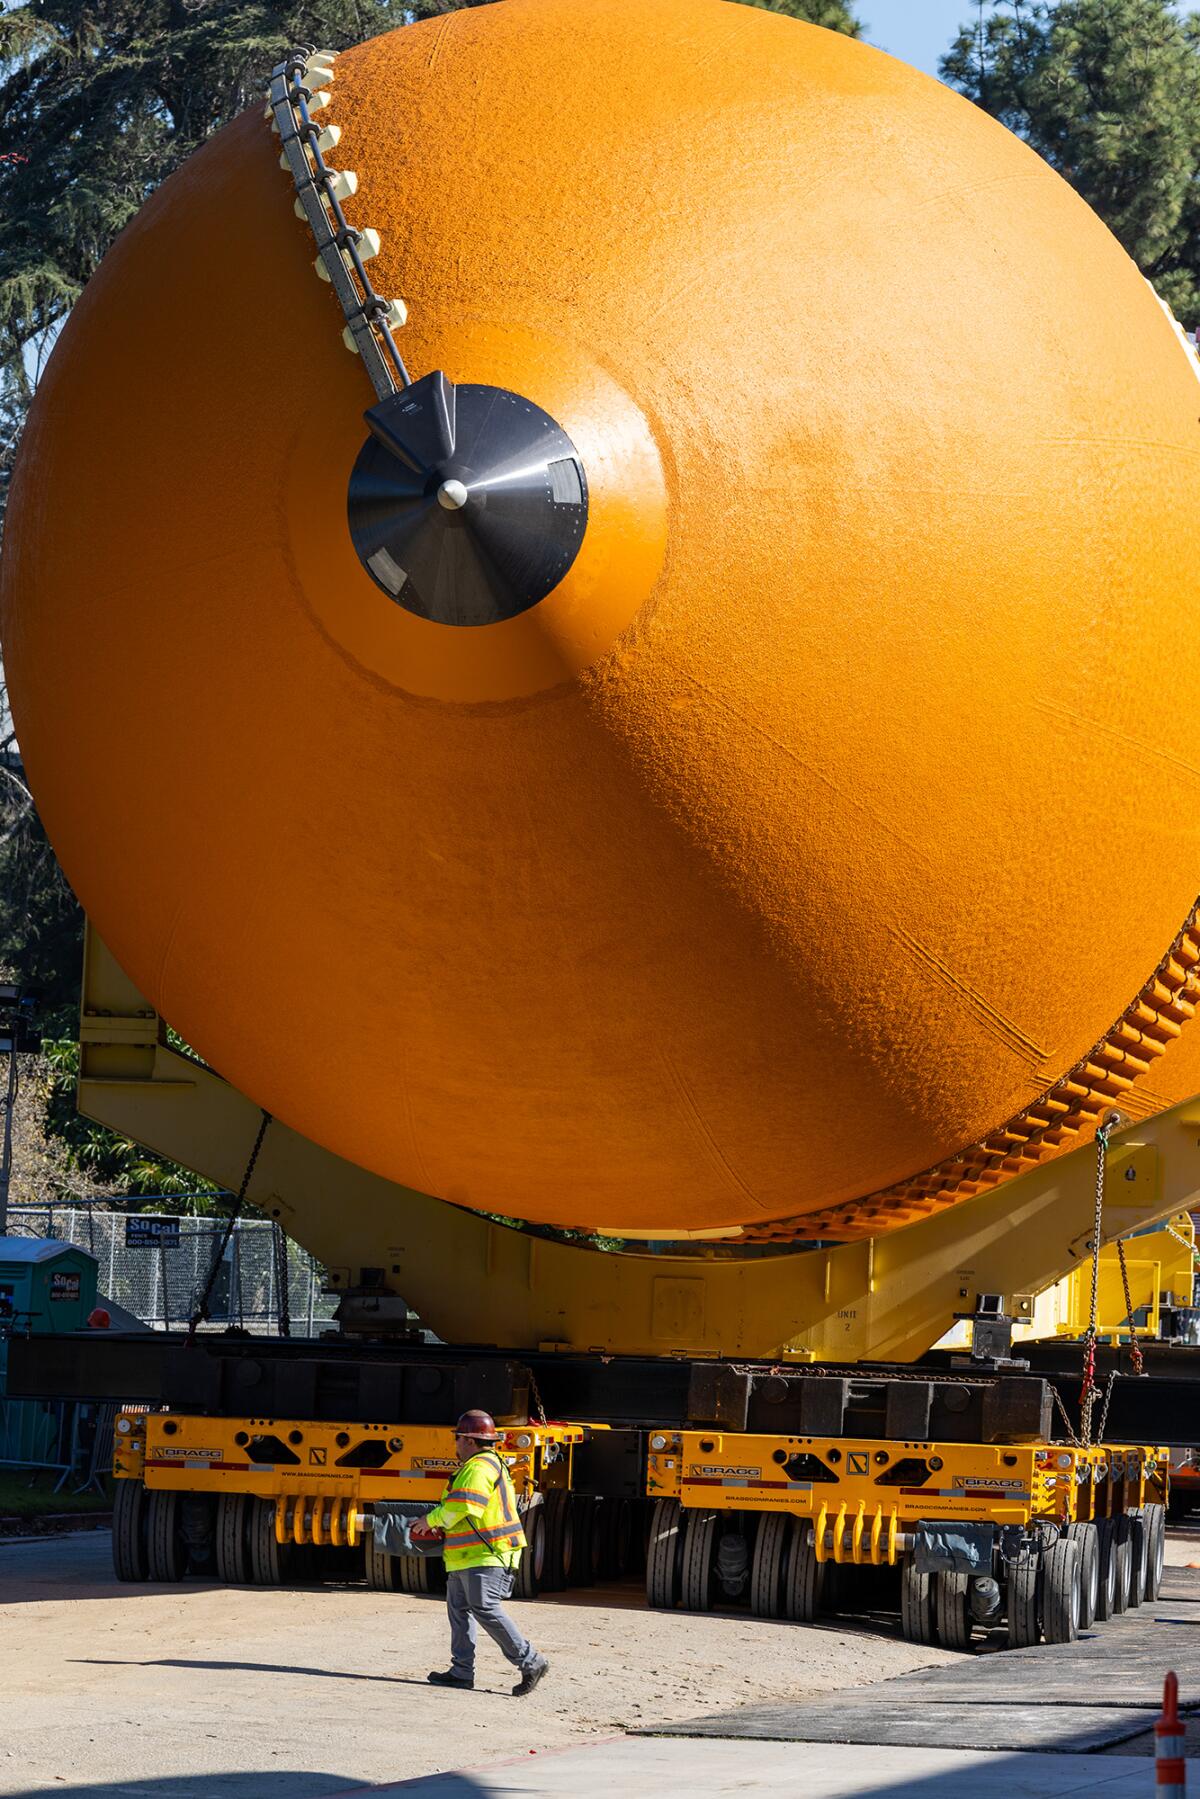 A crew member is dwarfed by the ET-94 space shuttle tank at the California Science Center.